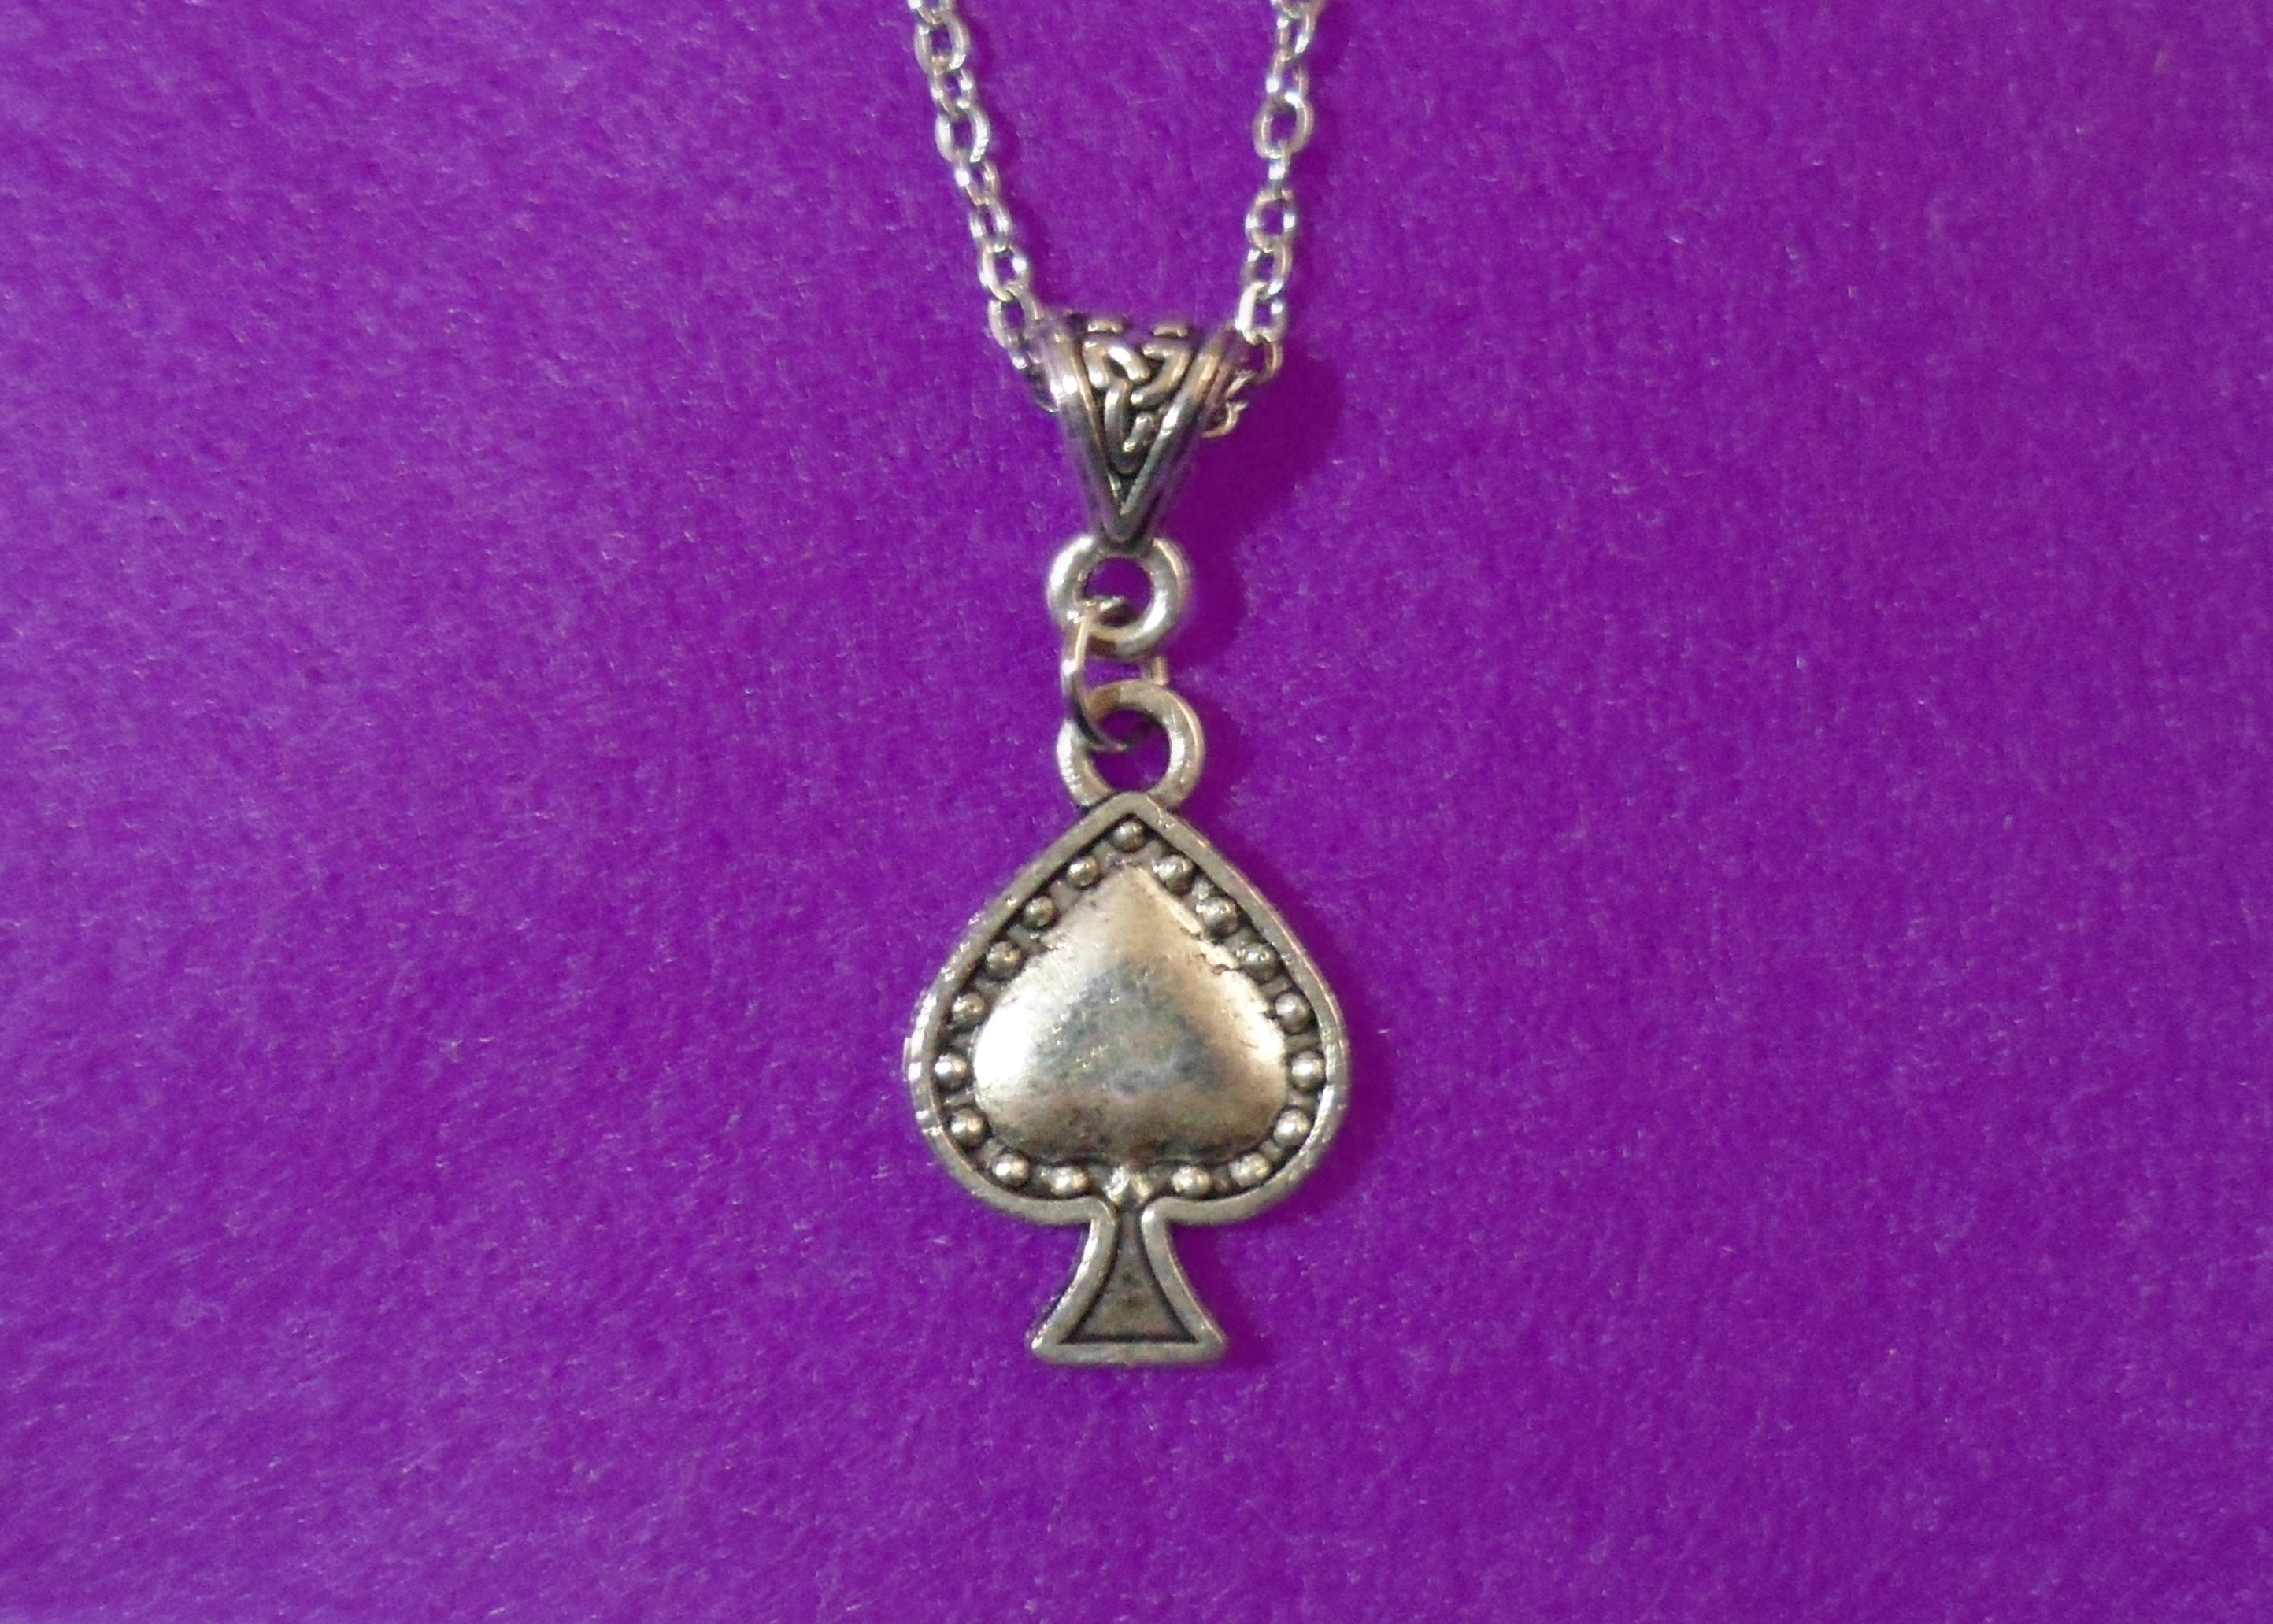 Ace of Spades Necklace - Tully Crafts